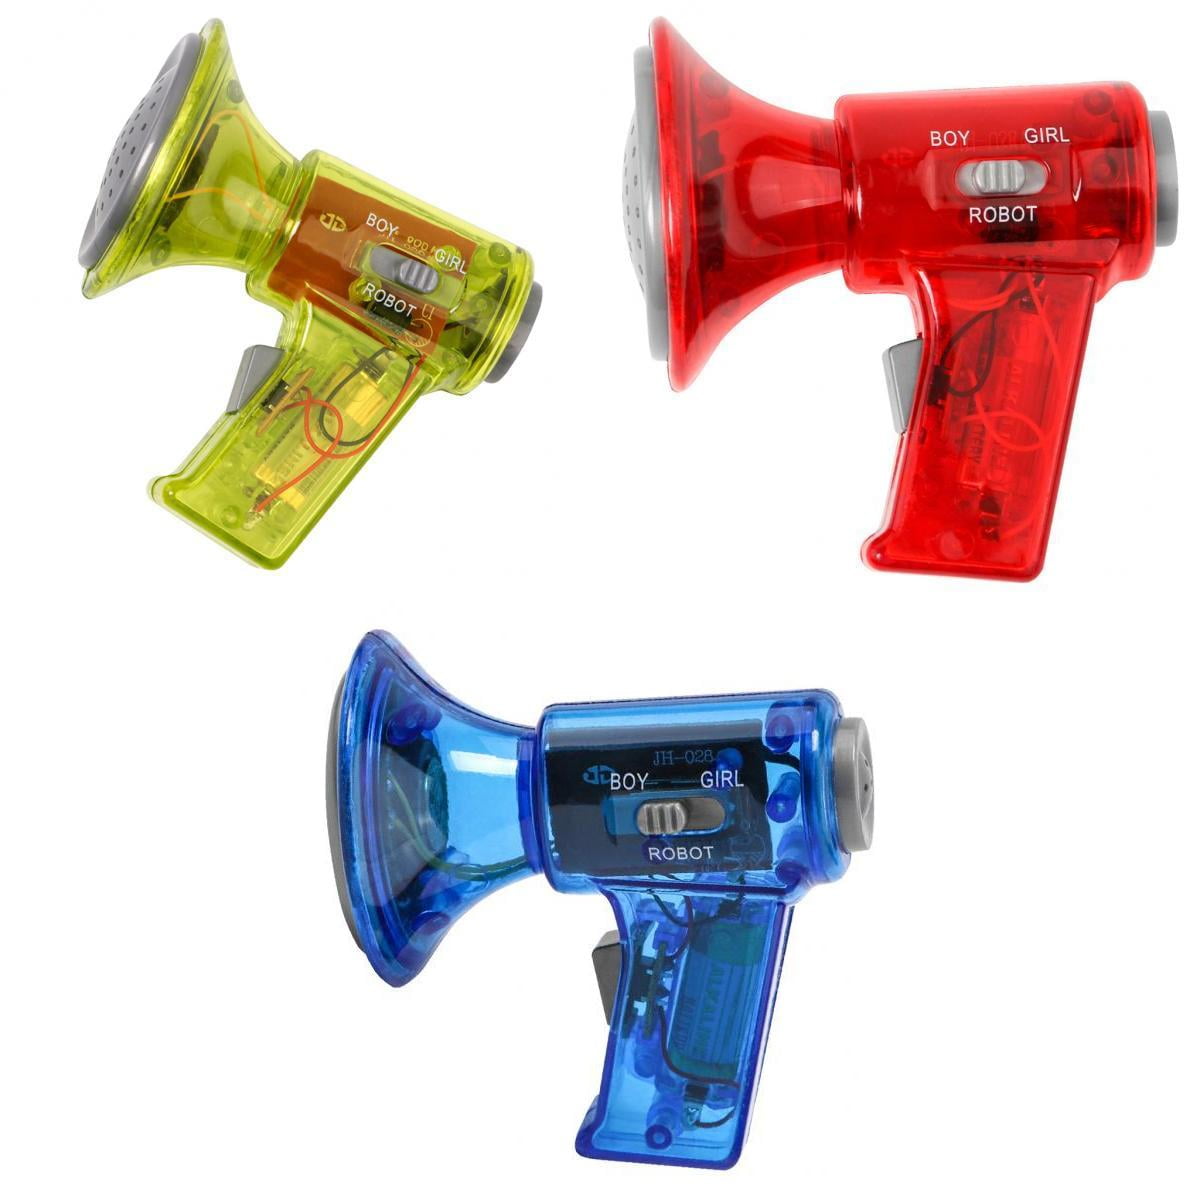 Set of 3 Plastic Toy Megaphone Accessories for 6 Inch Action Figures 